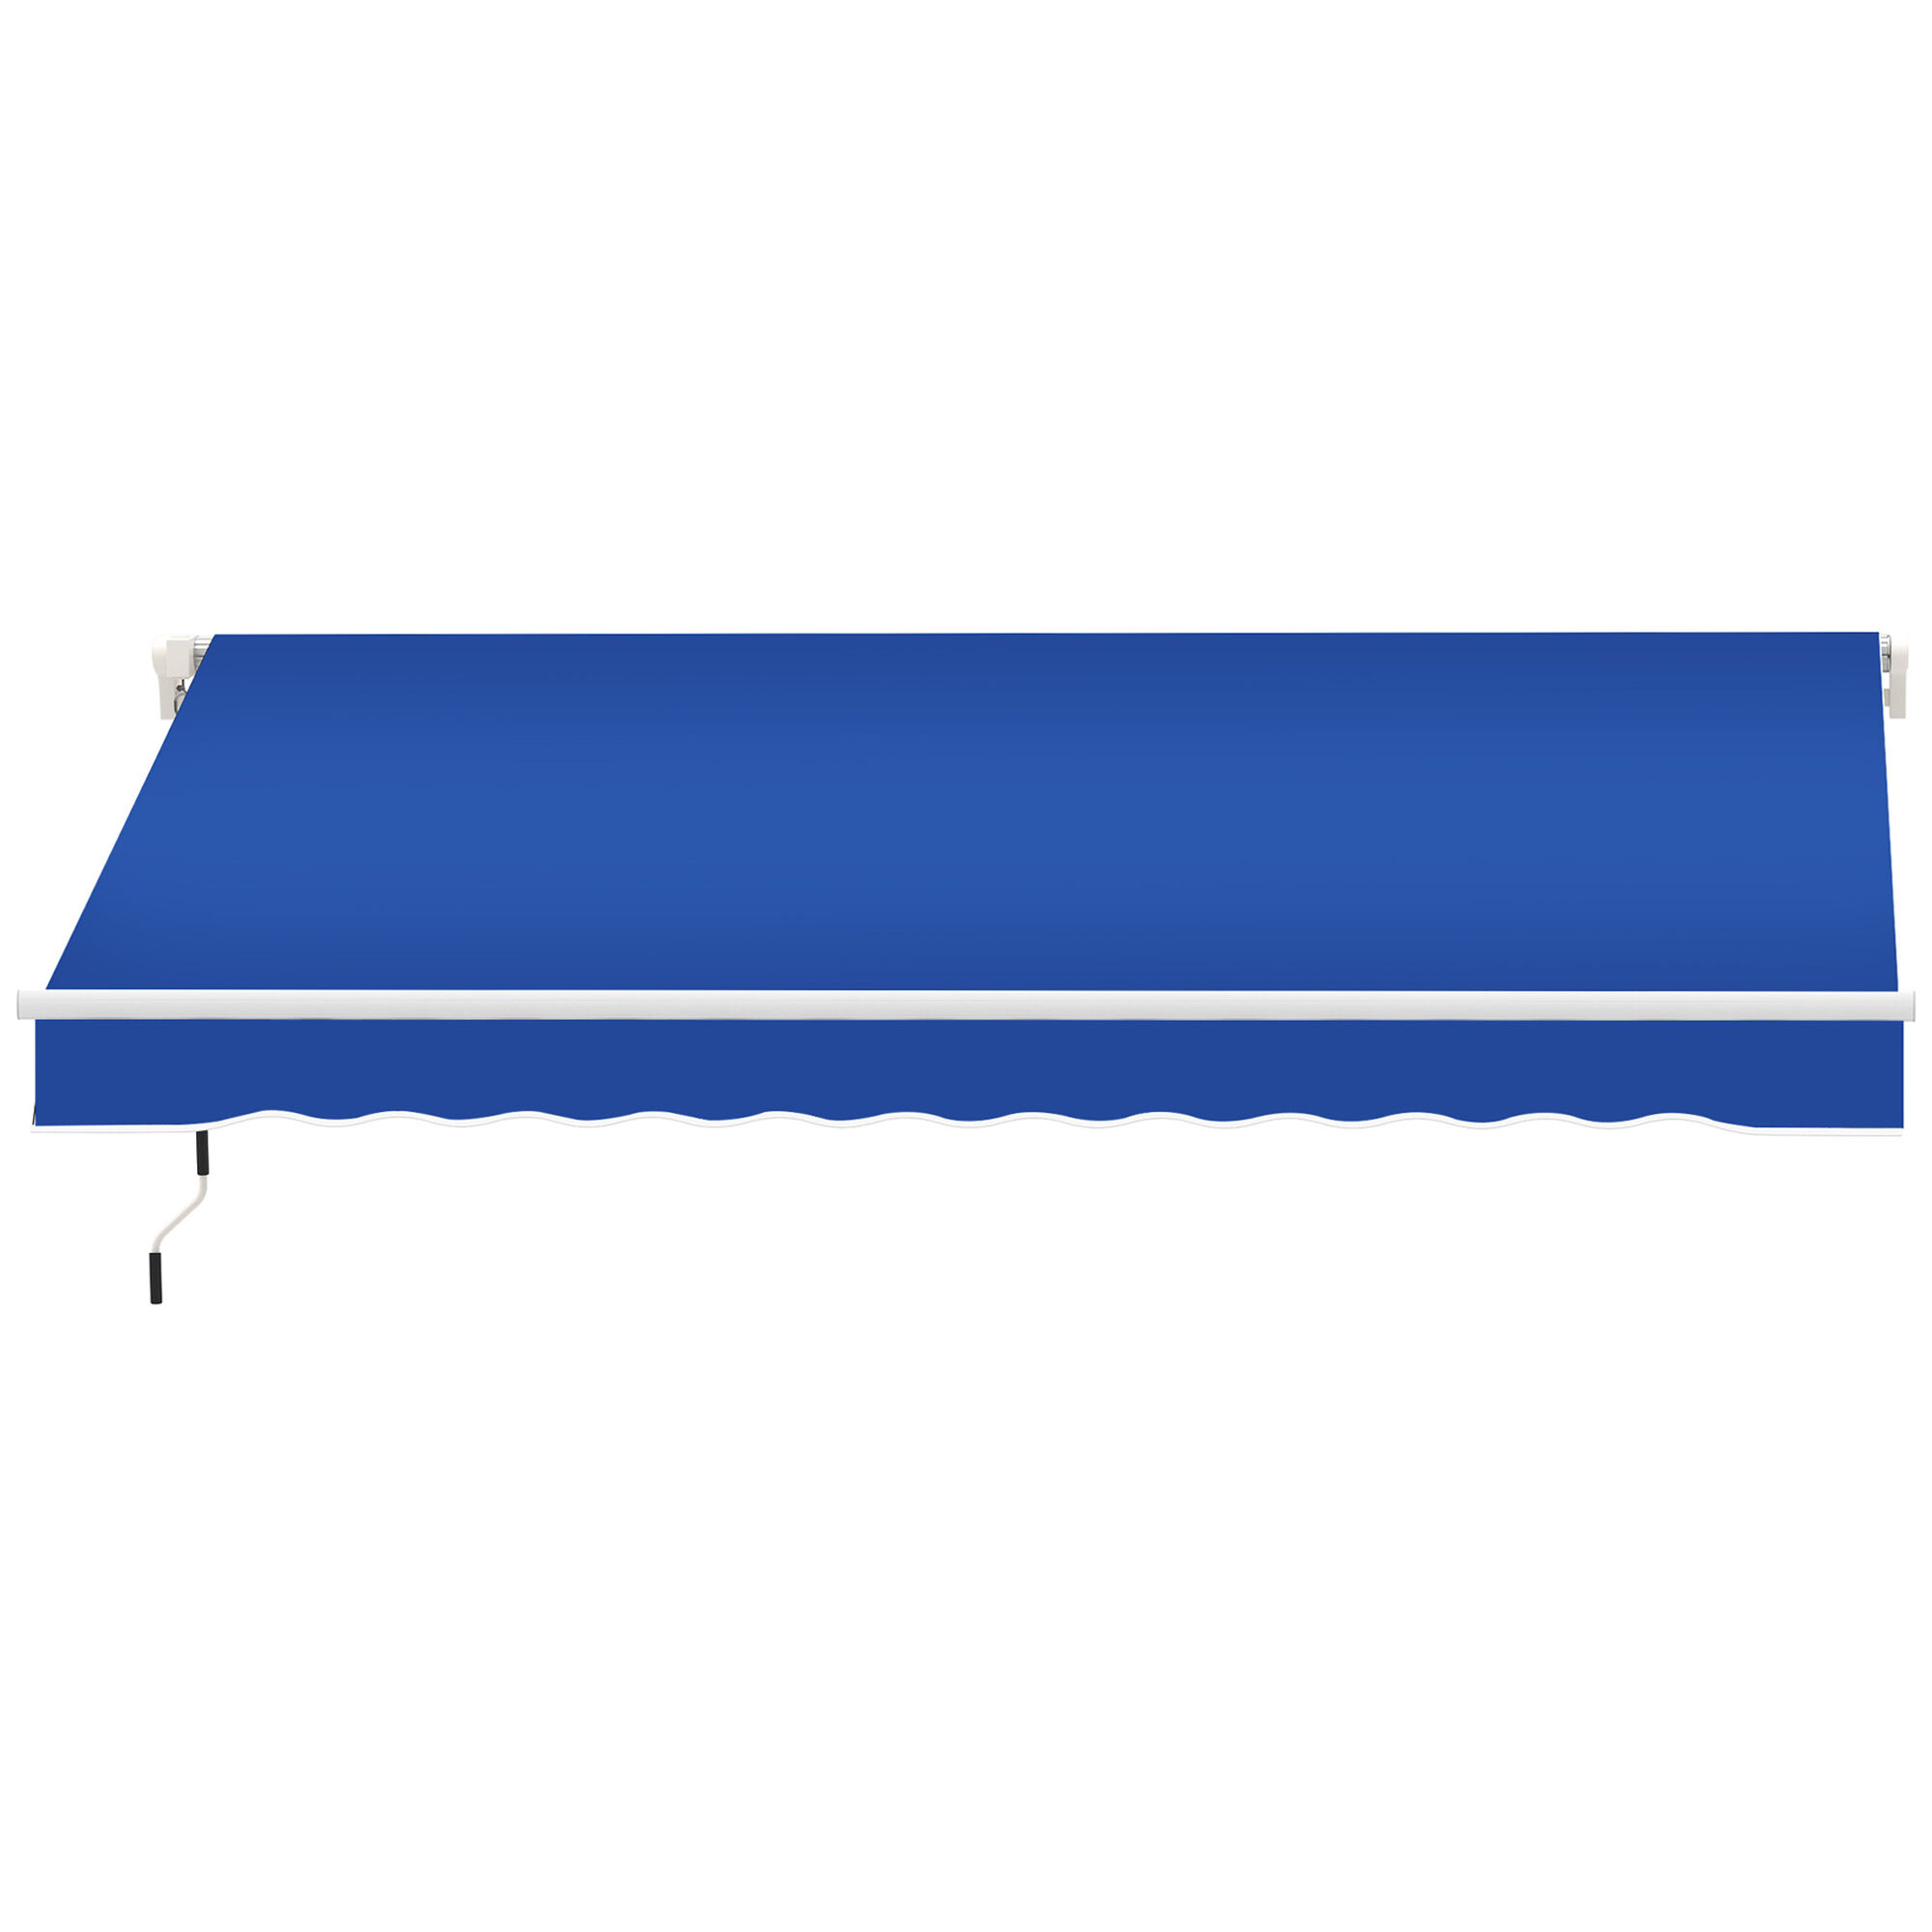 Outsunny Patio Awning 8x7 Blue Manual Retractable Sun Shade for Deck Window Outdoor Cover   Aosom.com